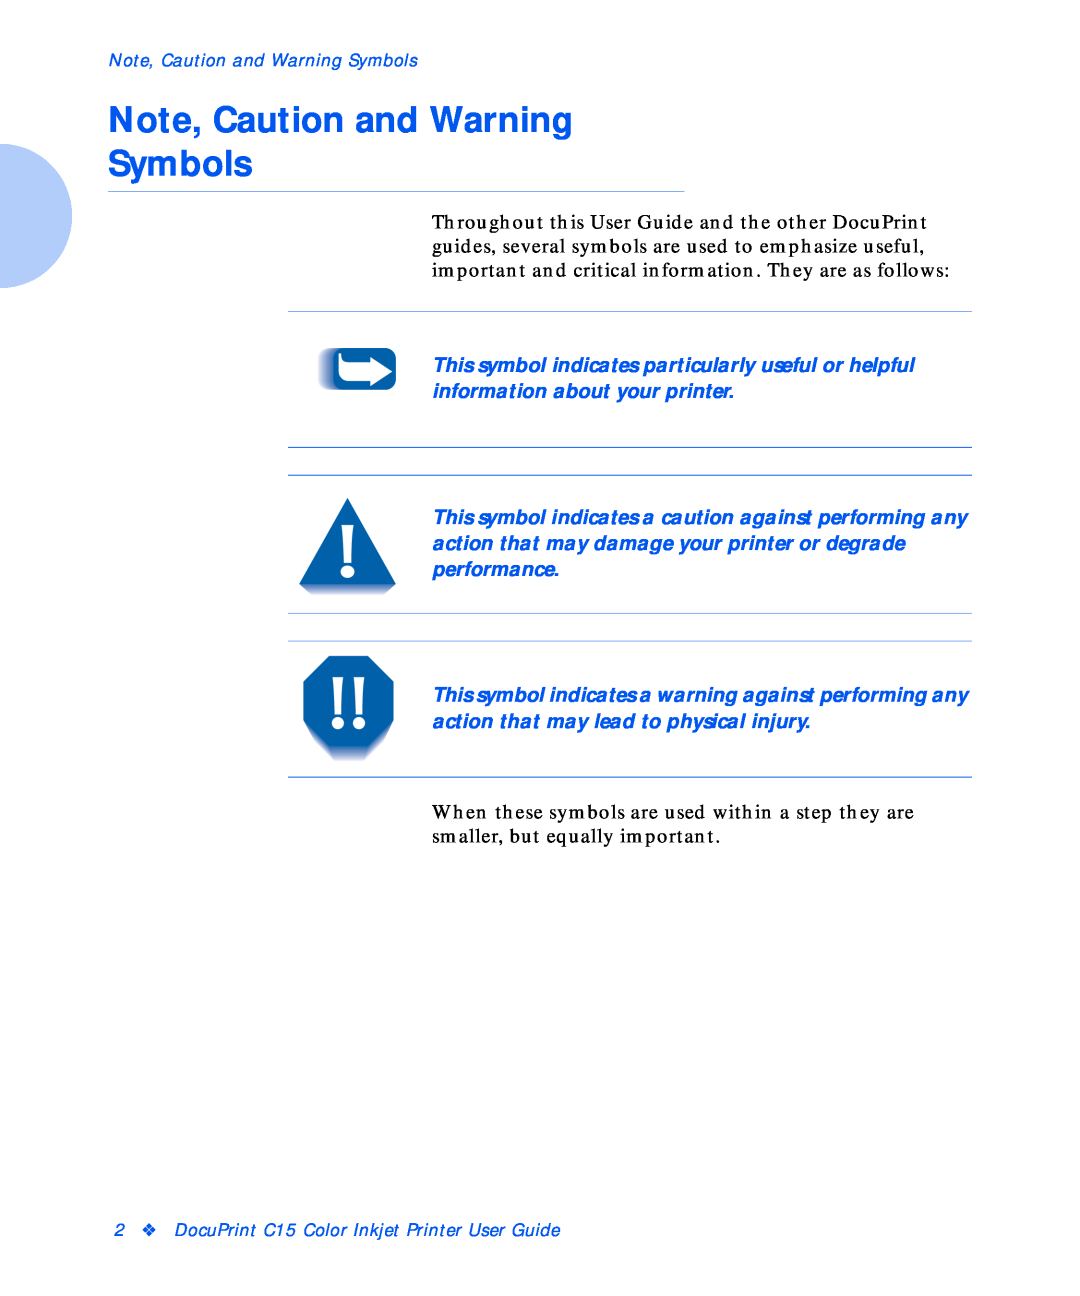 Xerox manual Note, Caution and Warning Symbols, DocuPrint C15 Color Inkjet Printer User Guide 